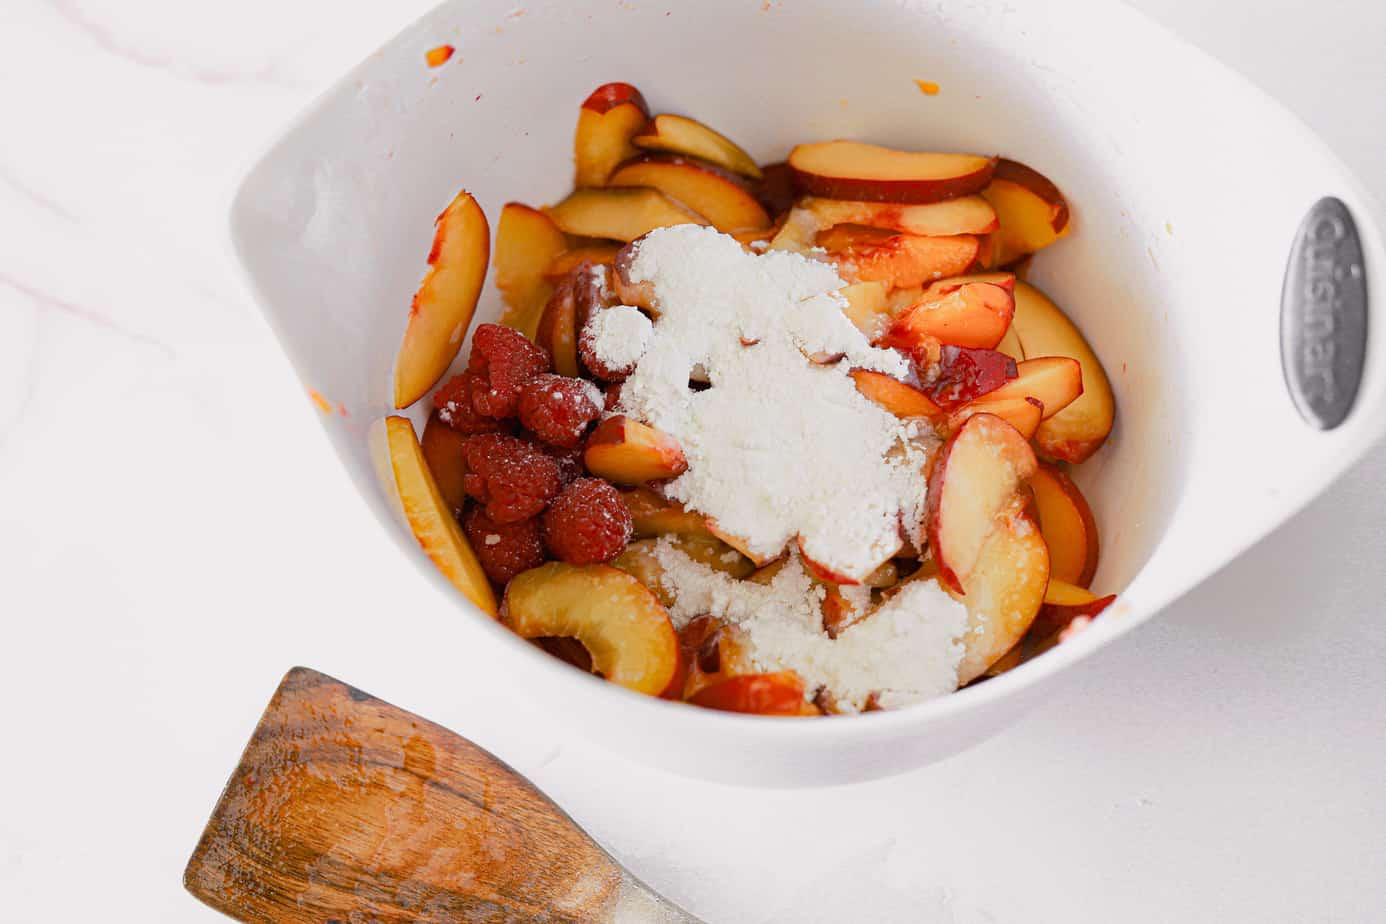 Bowl of sliced peaches and raspberries tossed in a scoop of sugar